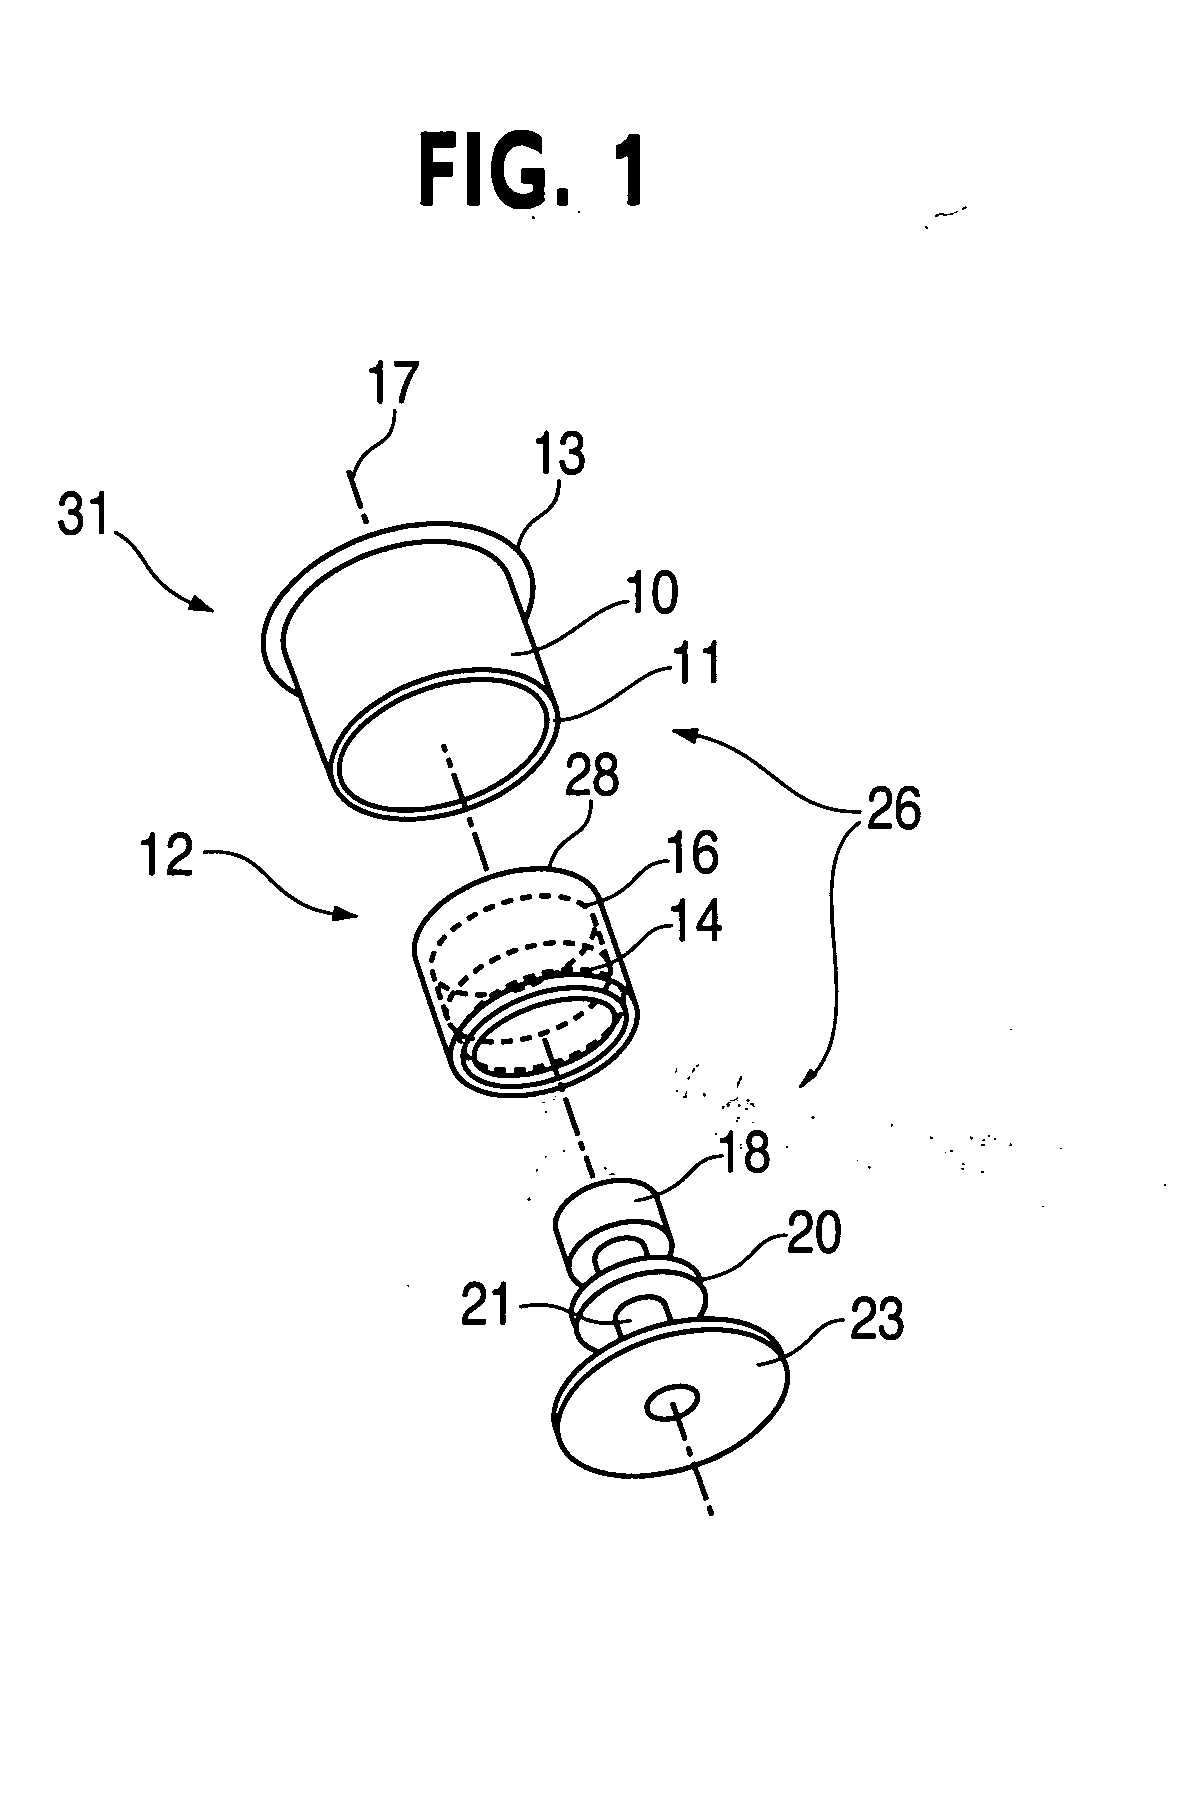 Electrical machine having centrally disposed stator